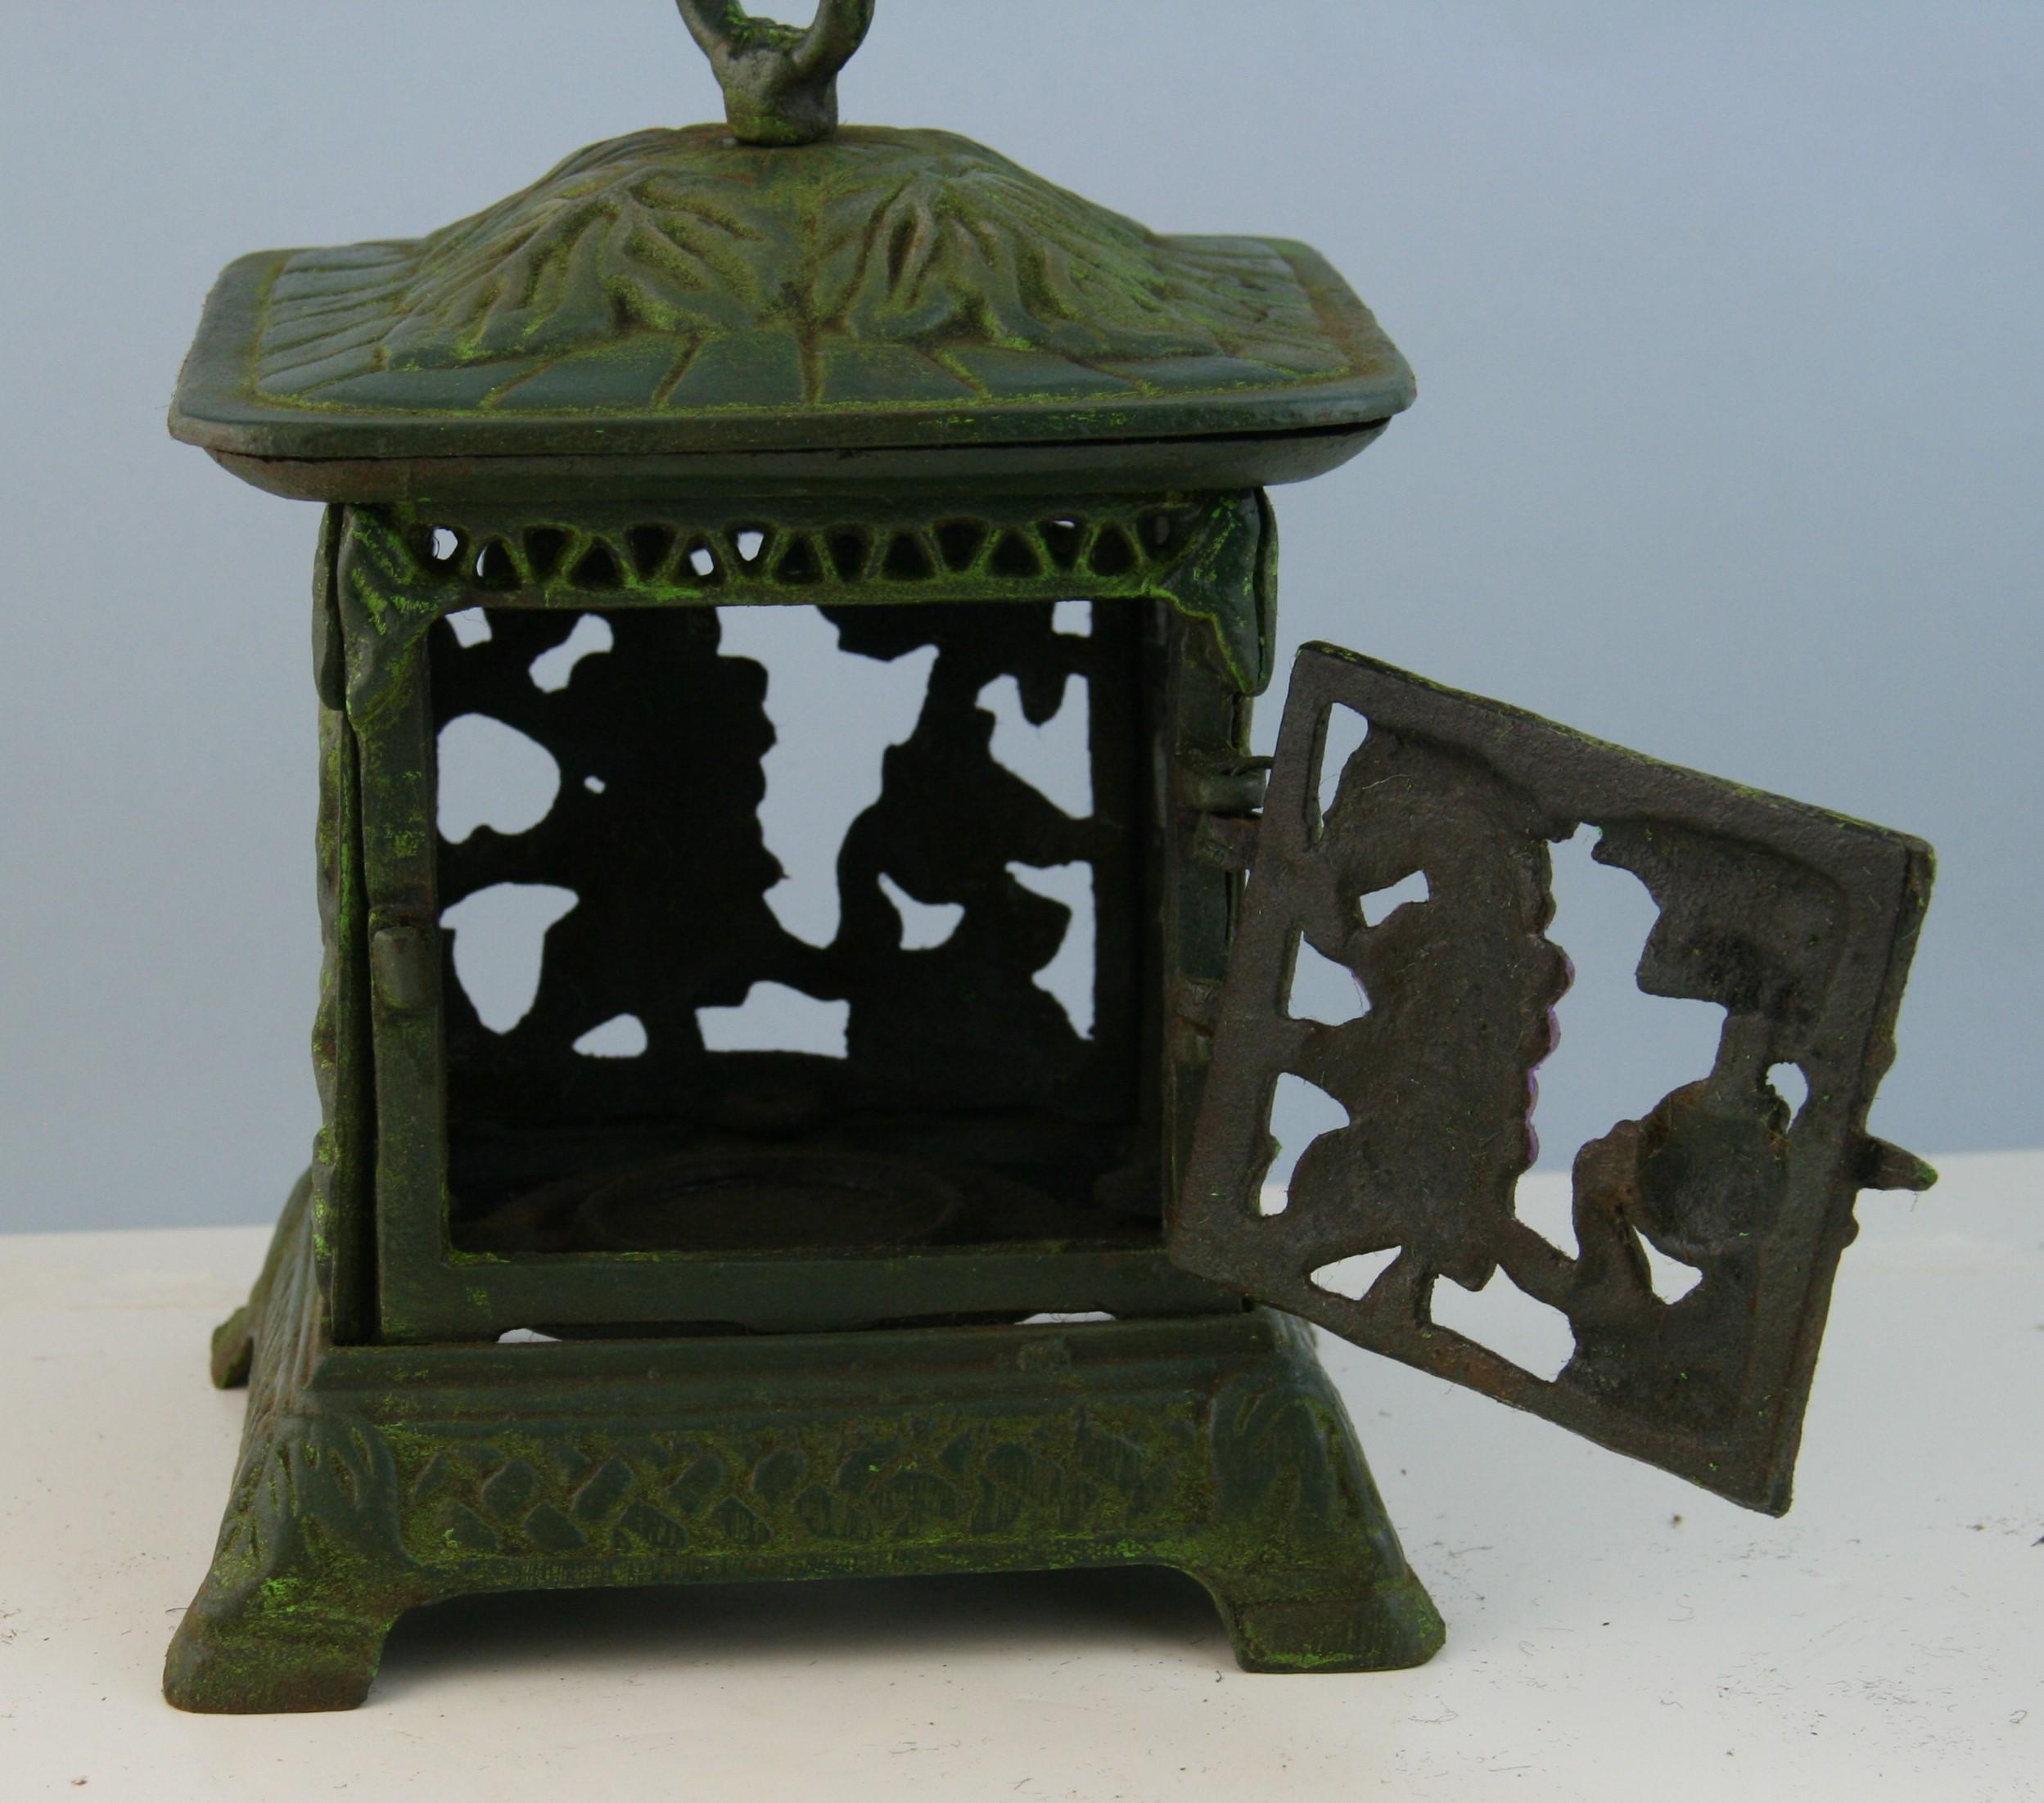 Japanese Hand Painted Grapes and Leaves Garden Lighting Lantern For Sale 3